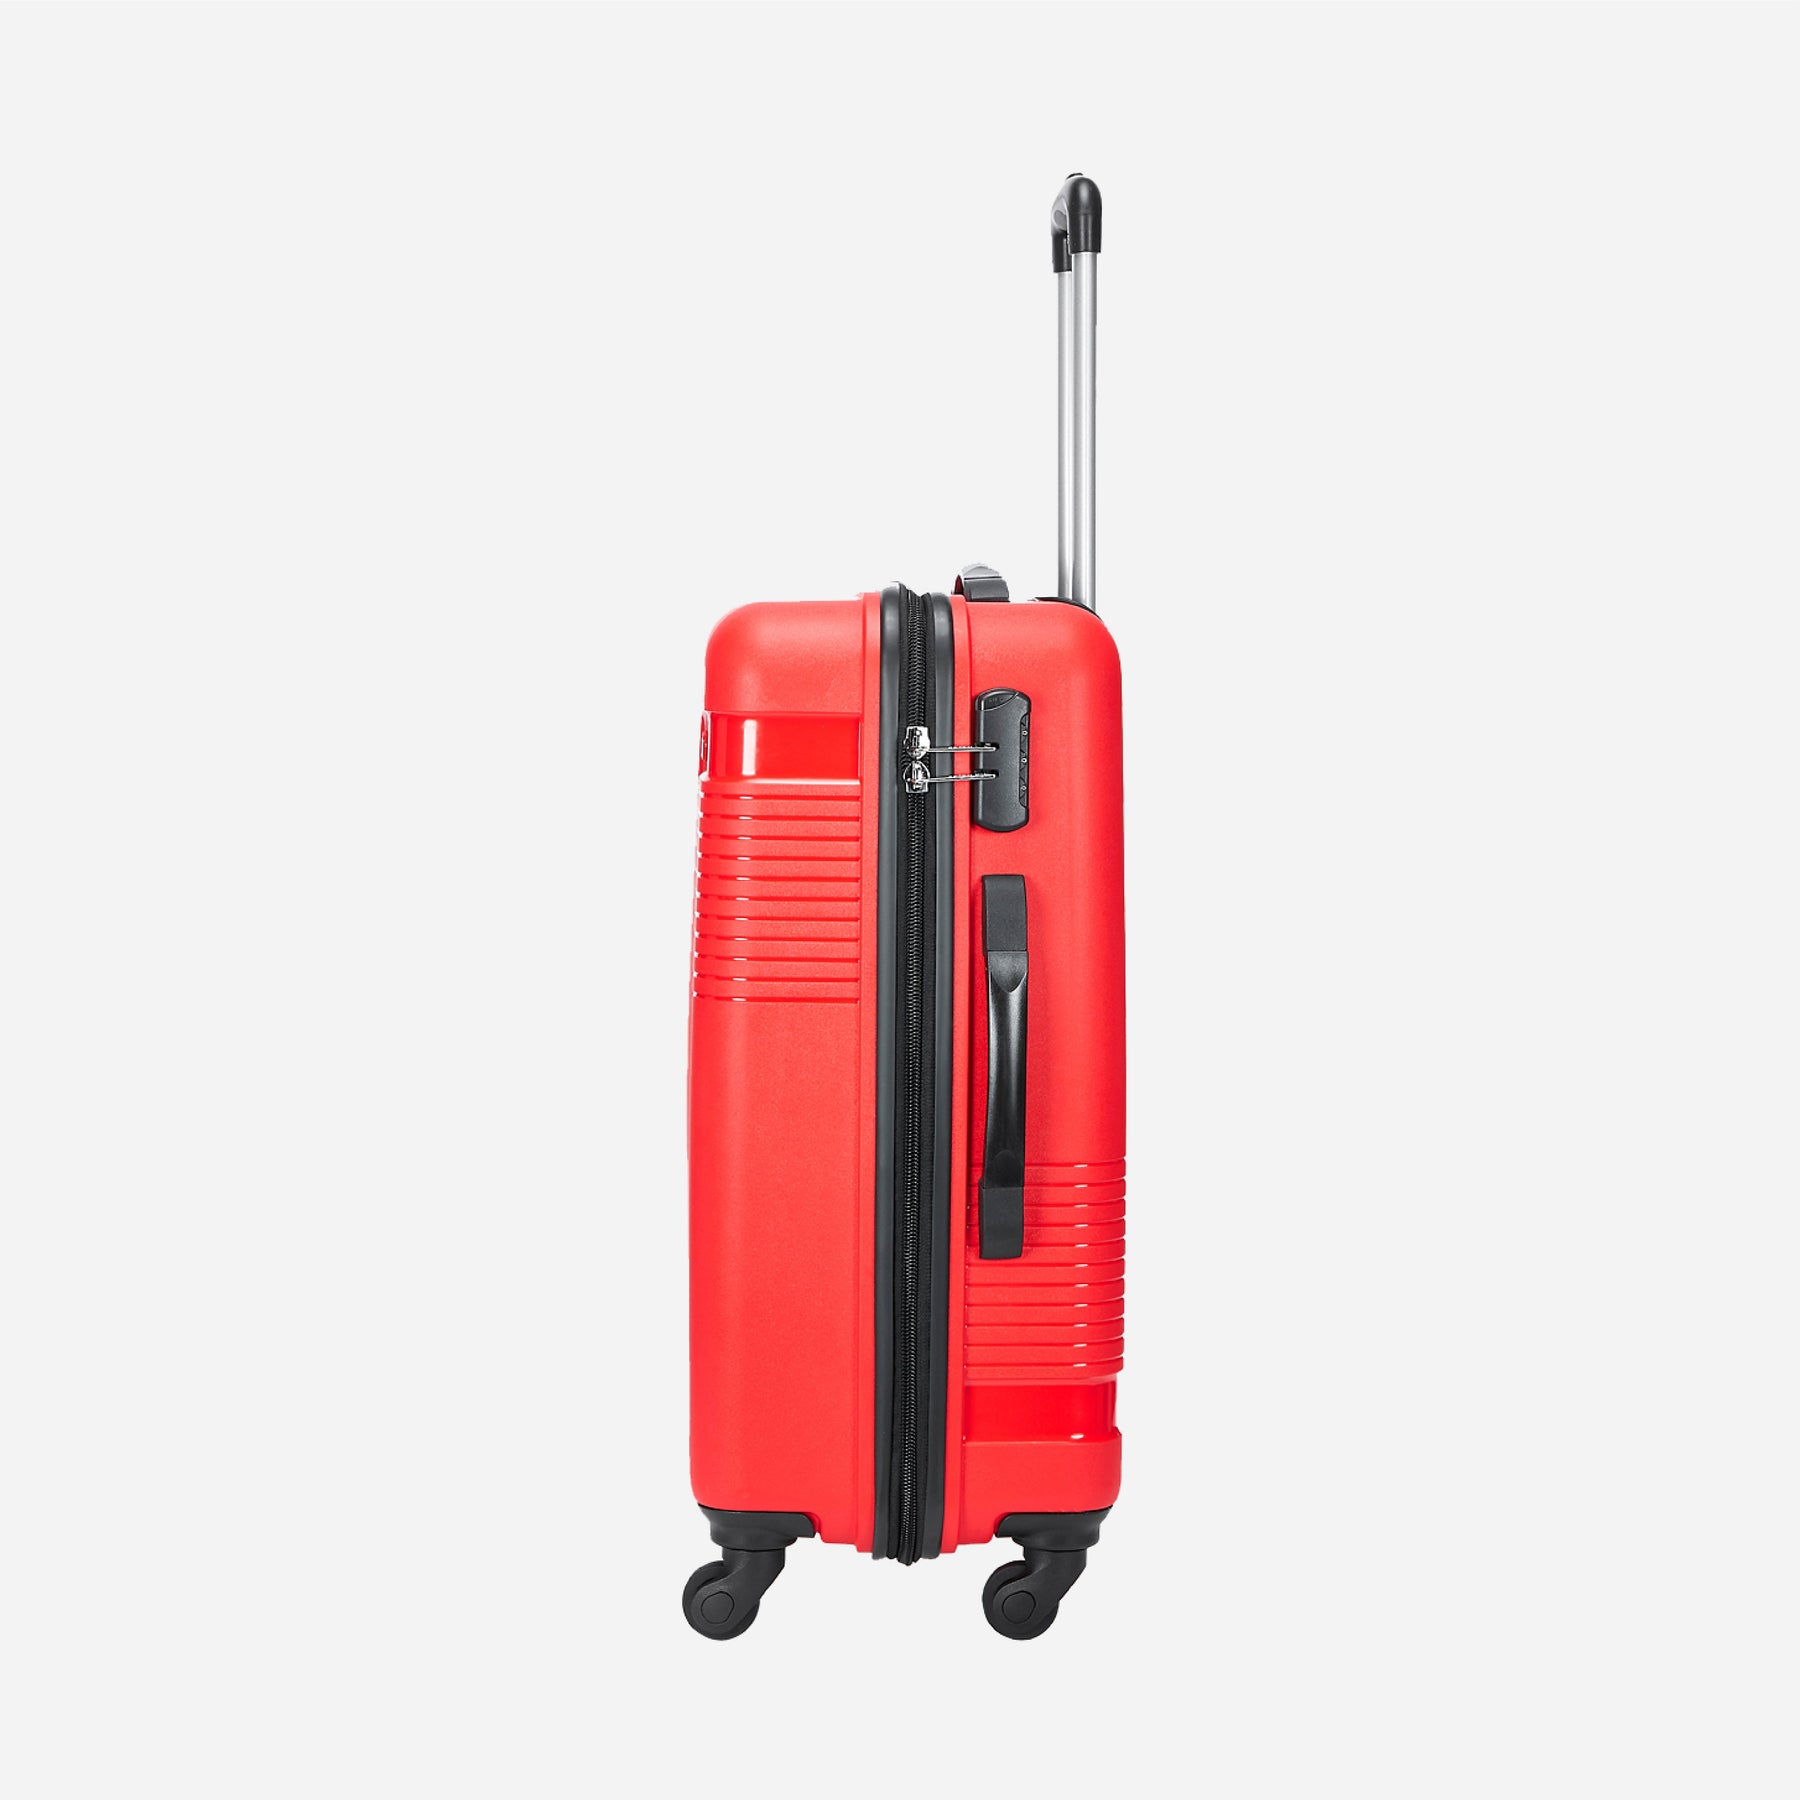 Zion Lightweight PP Hard Luggage Combo Set (Small, Medium and Large) - Cherry Red